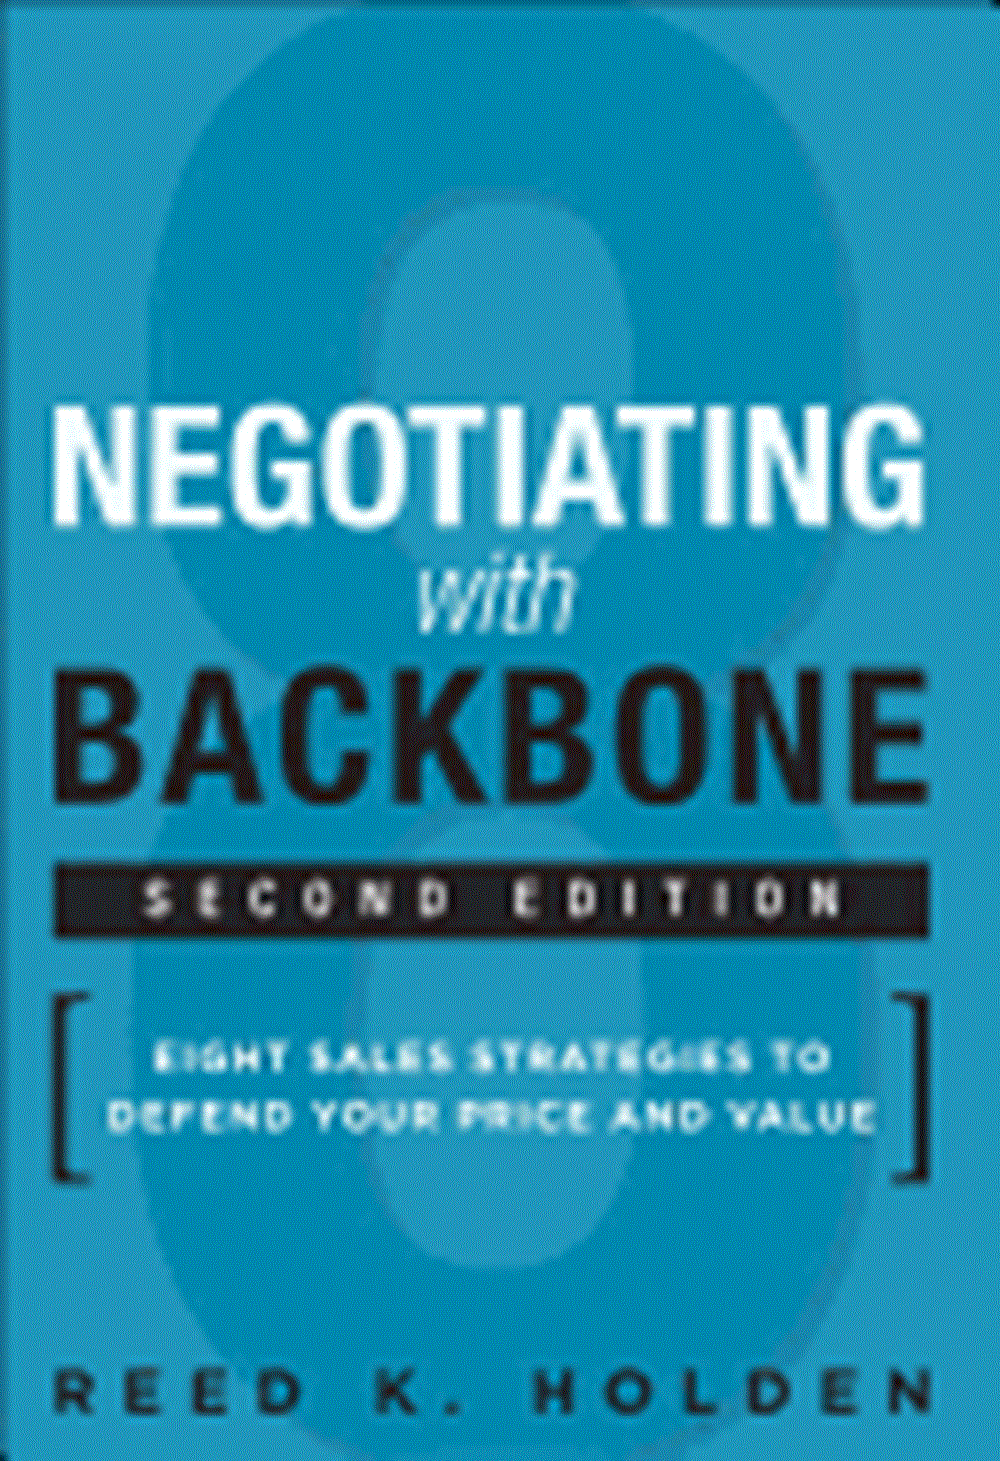 Negotiating with Backbone: Eight Sales Strategies to Defend Your Price and Value (Revised)